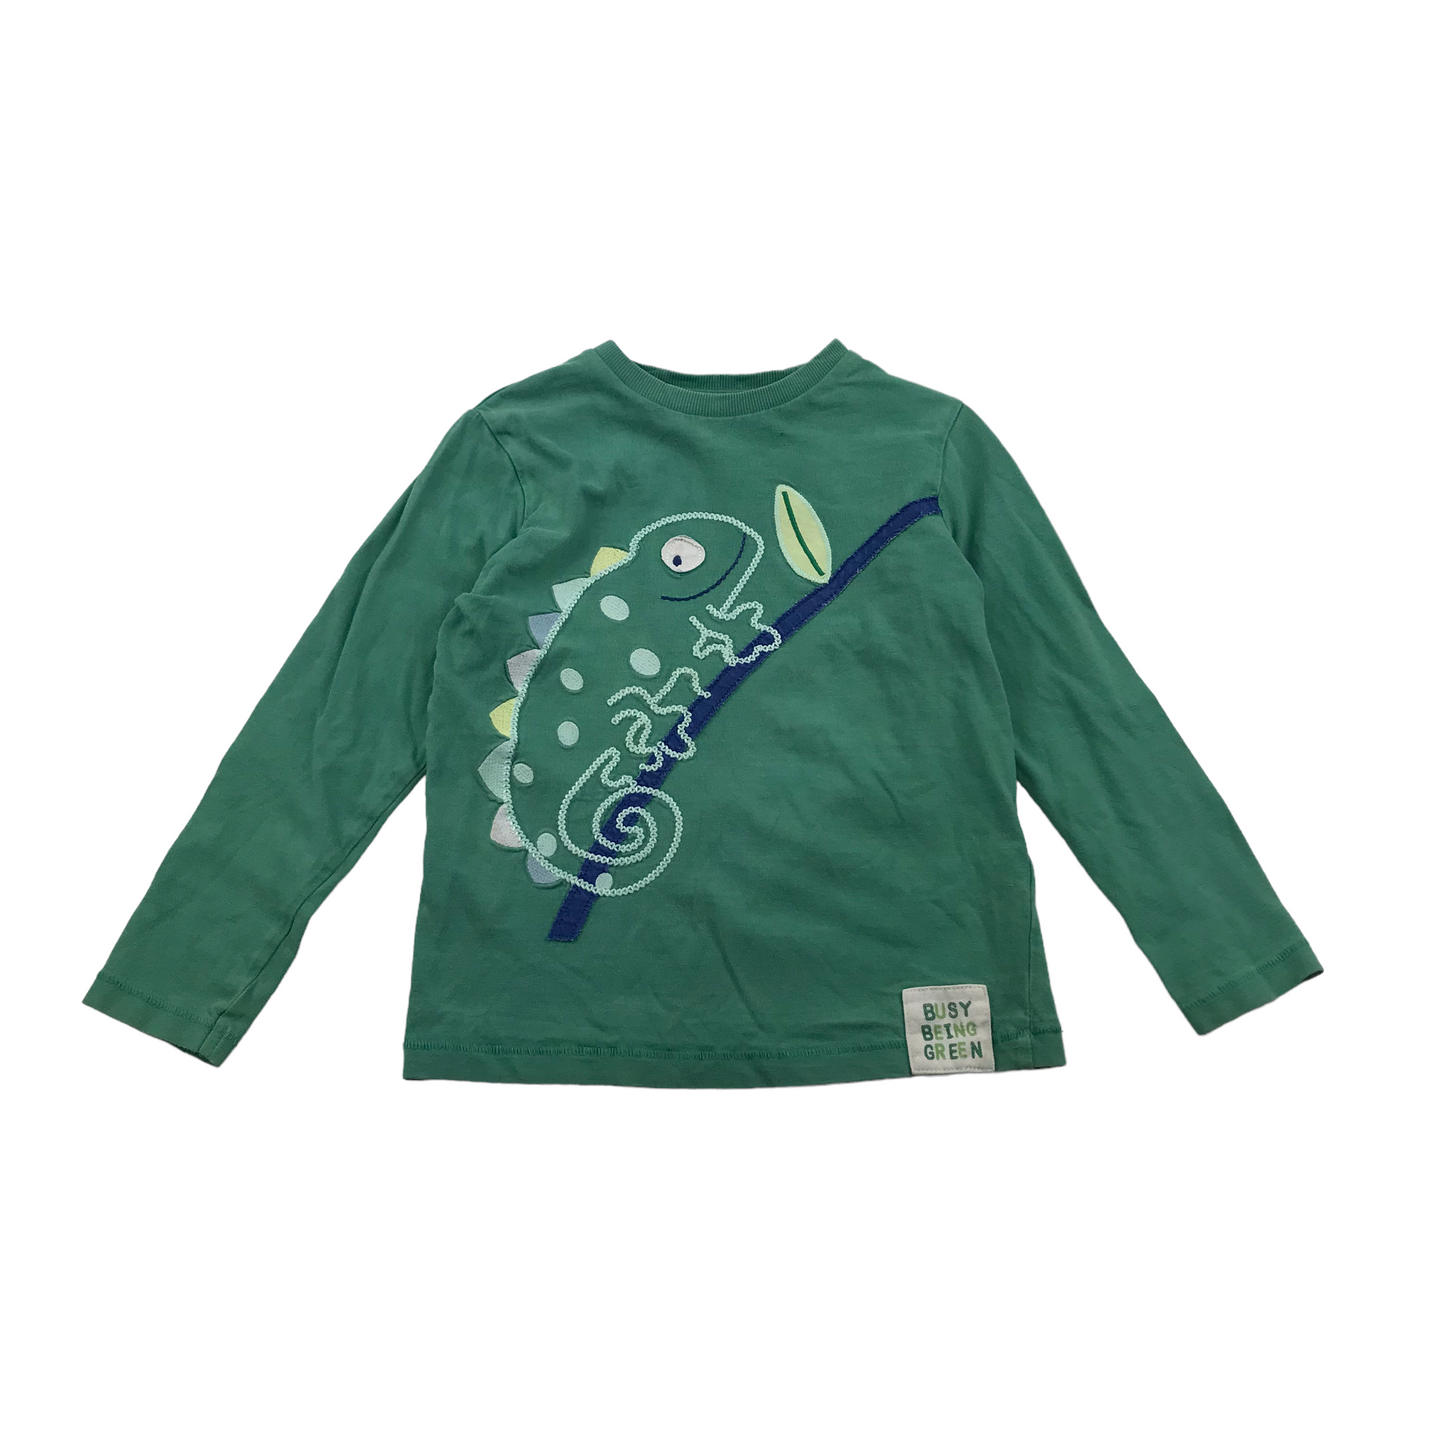 M&S Turquoise Green Chameleon T-shirt Age 5